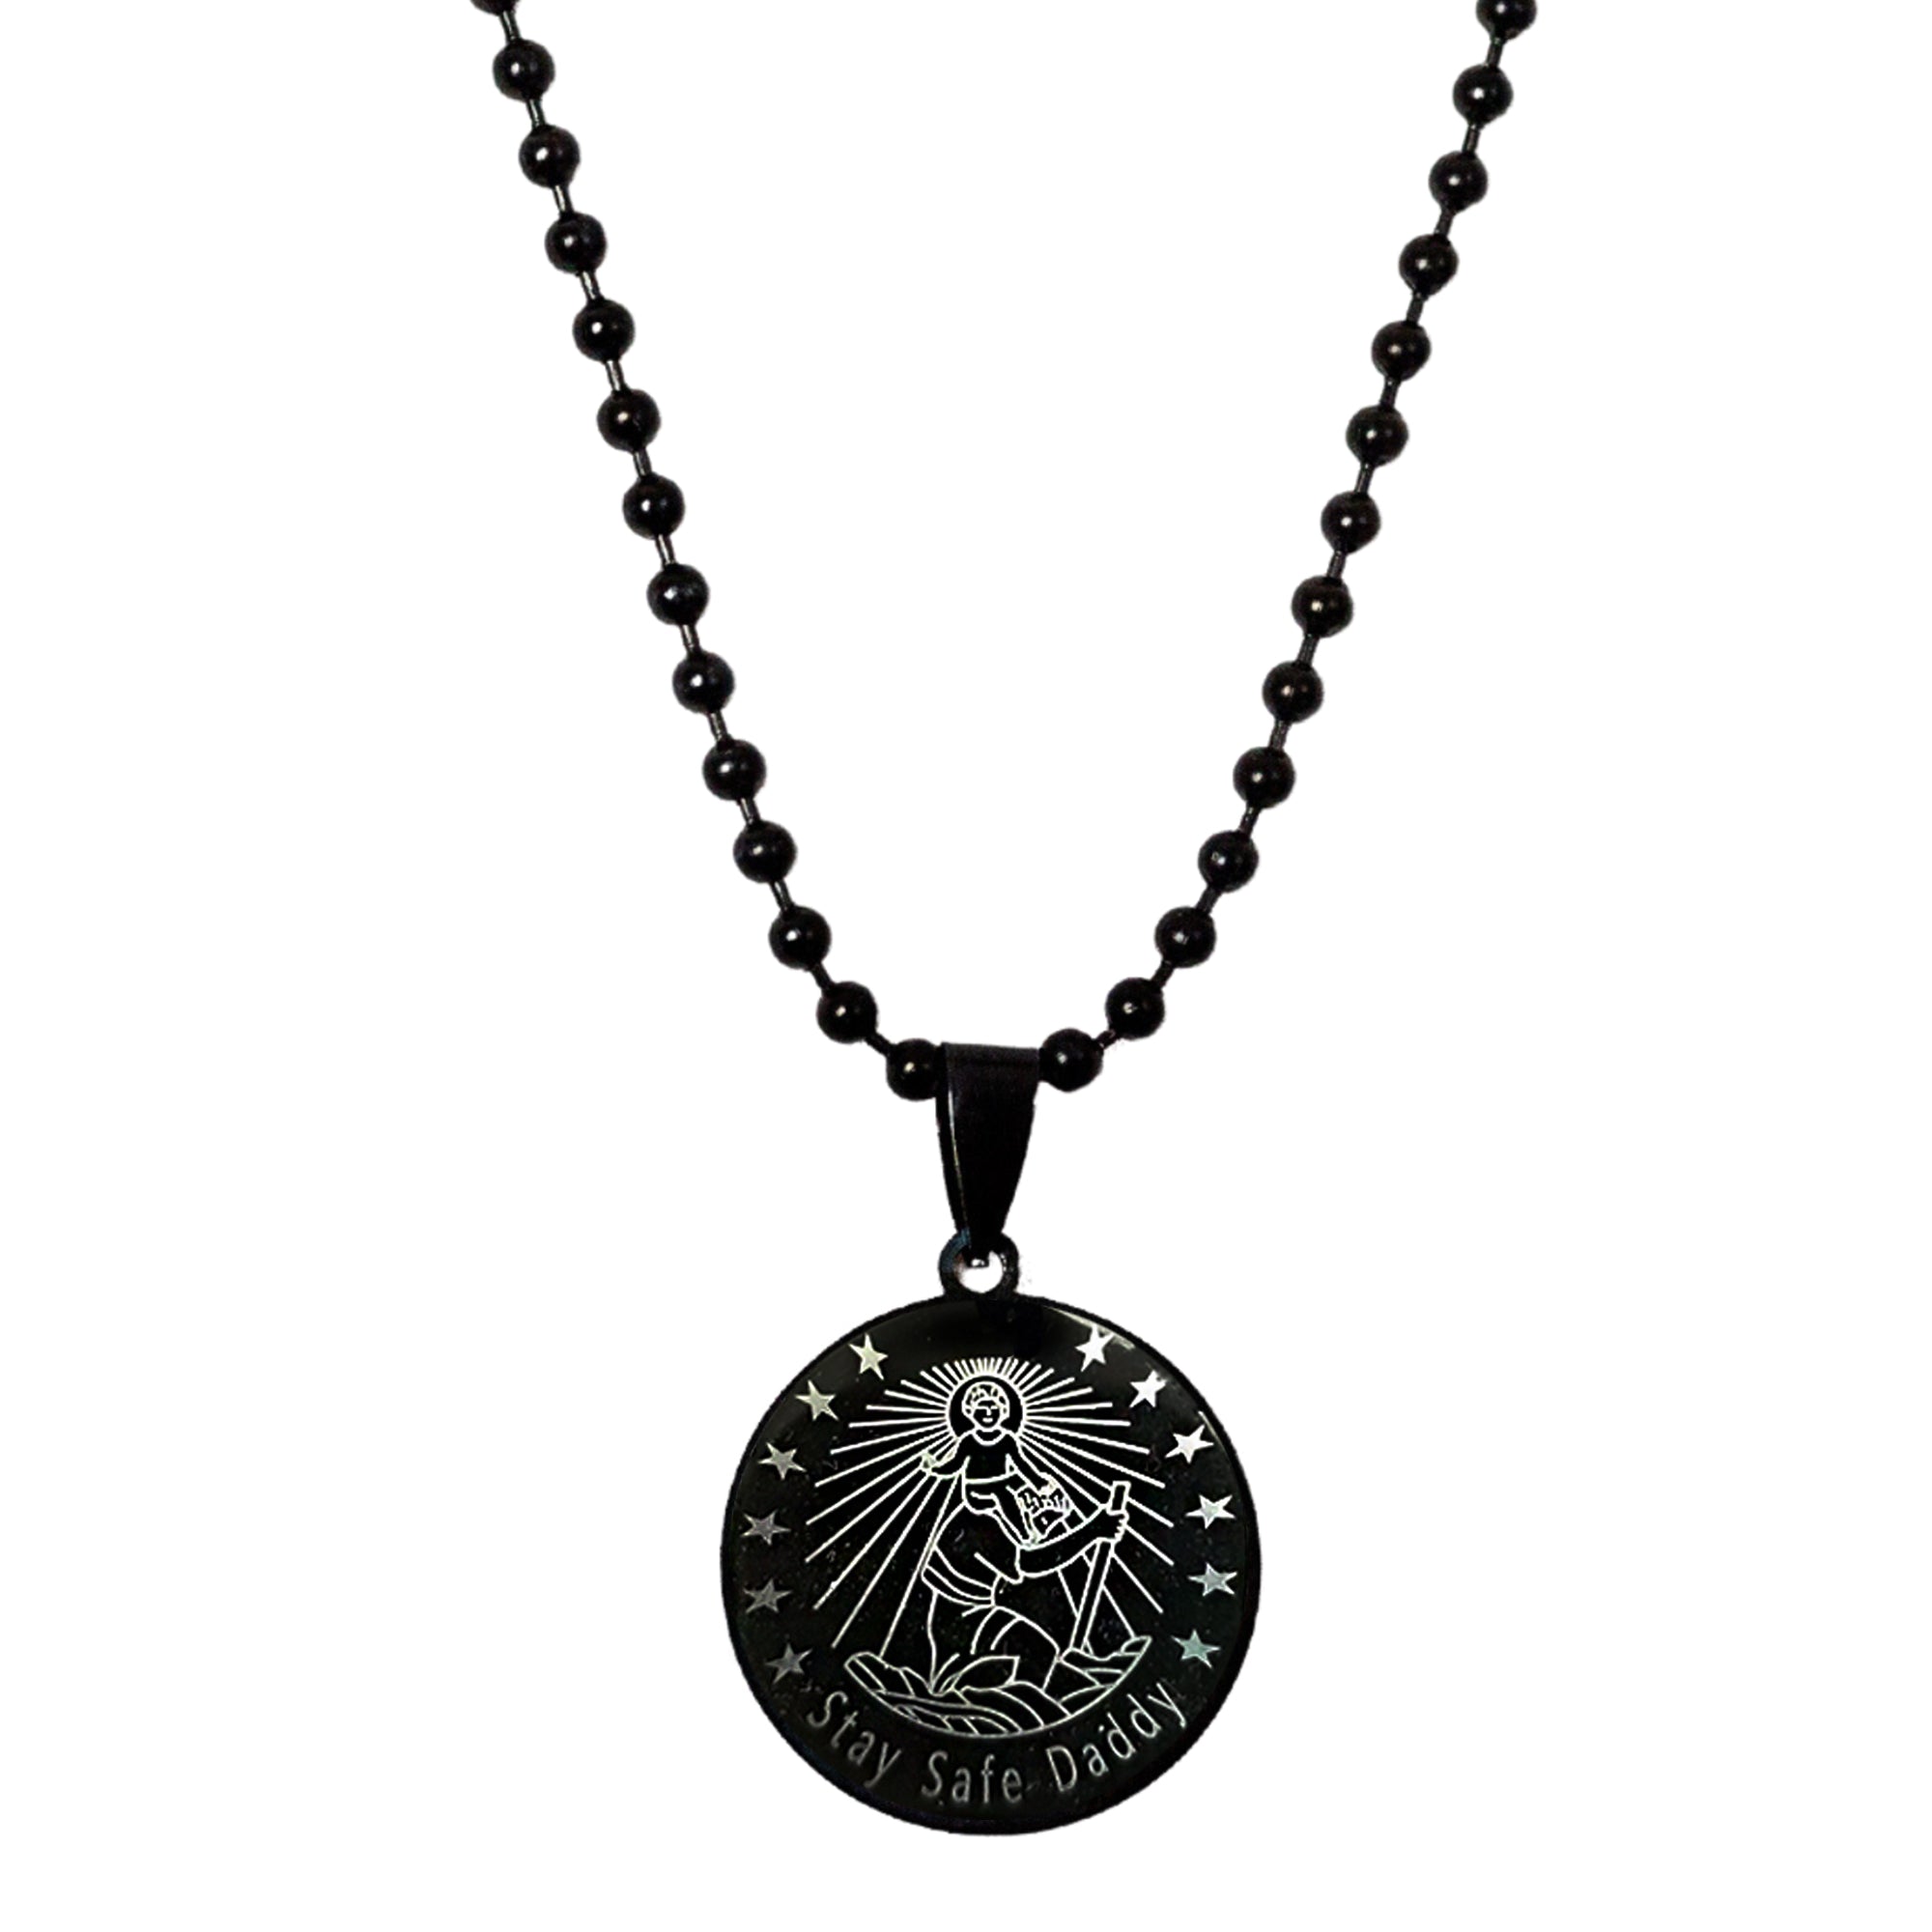 black steel mens saint christopher necklace cheap gift for someone going travelling off the map jewellery hove UK